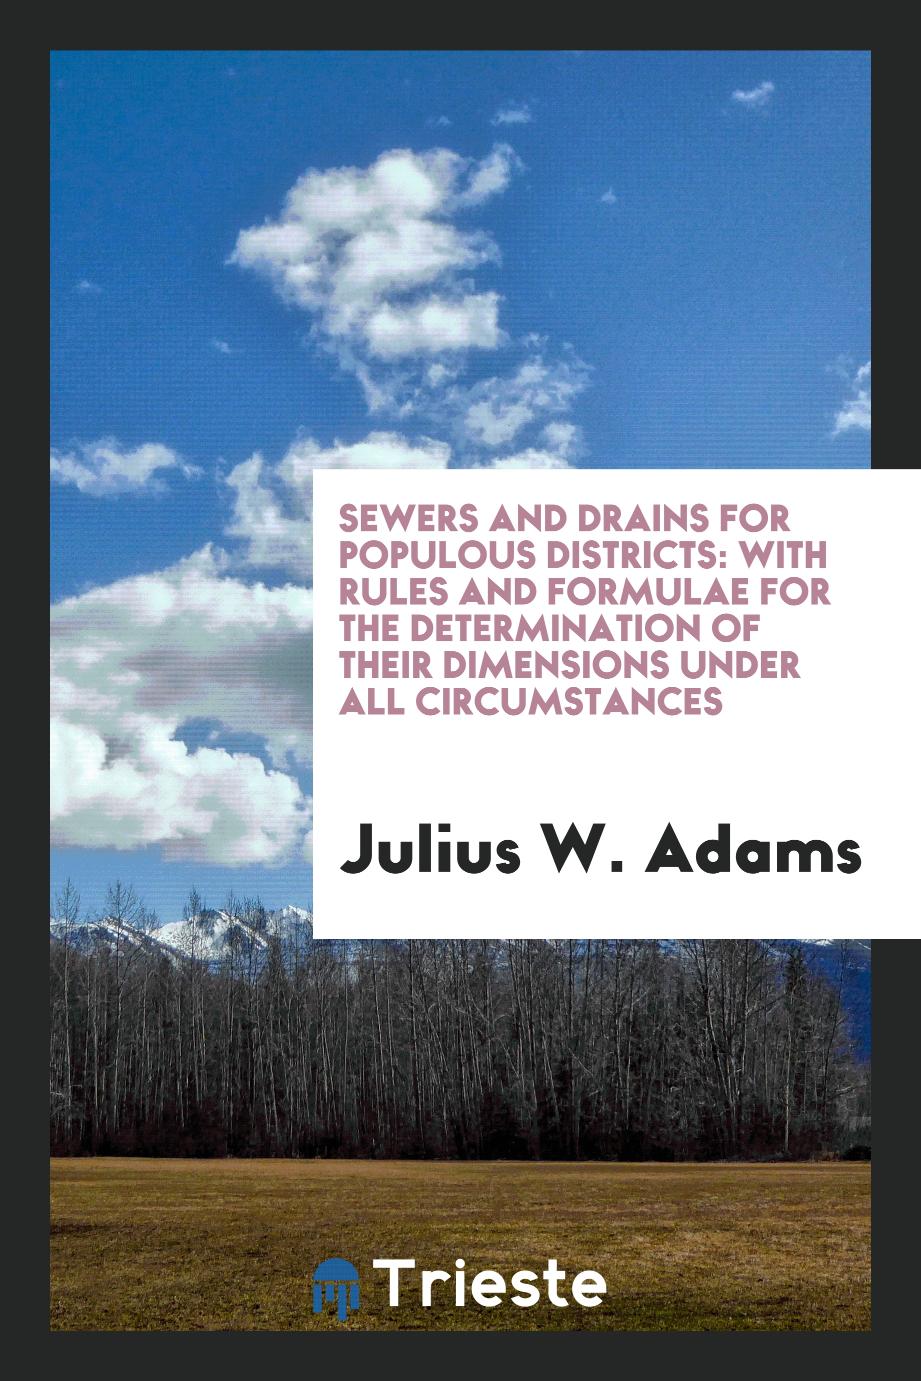 Sewers and Drains for Populous Districts: With Rules and Formulae for the Determination of Their Dimensions Under All Circumstances